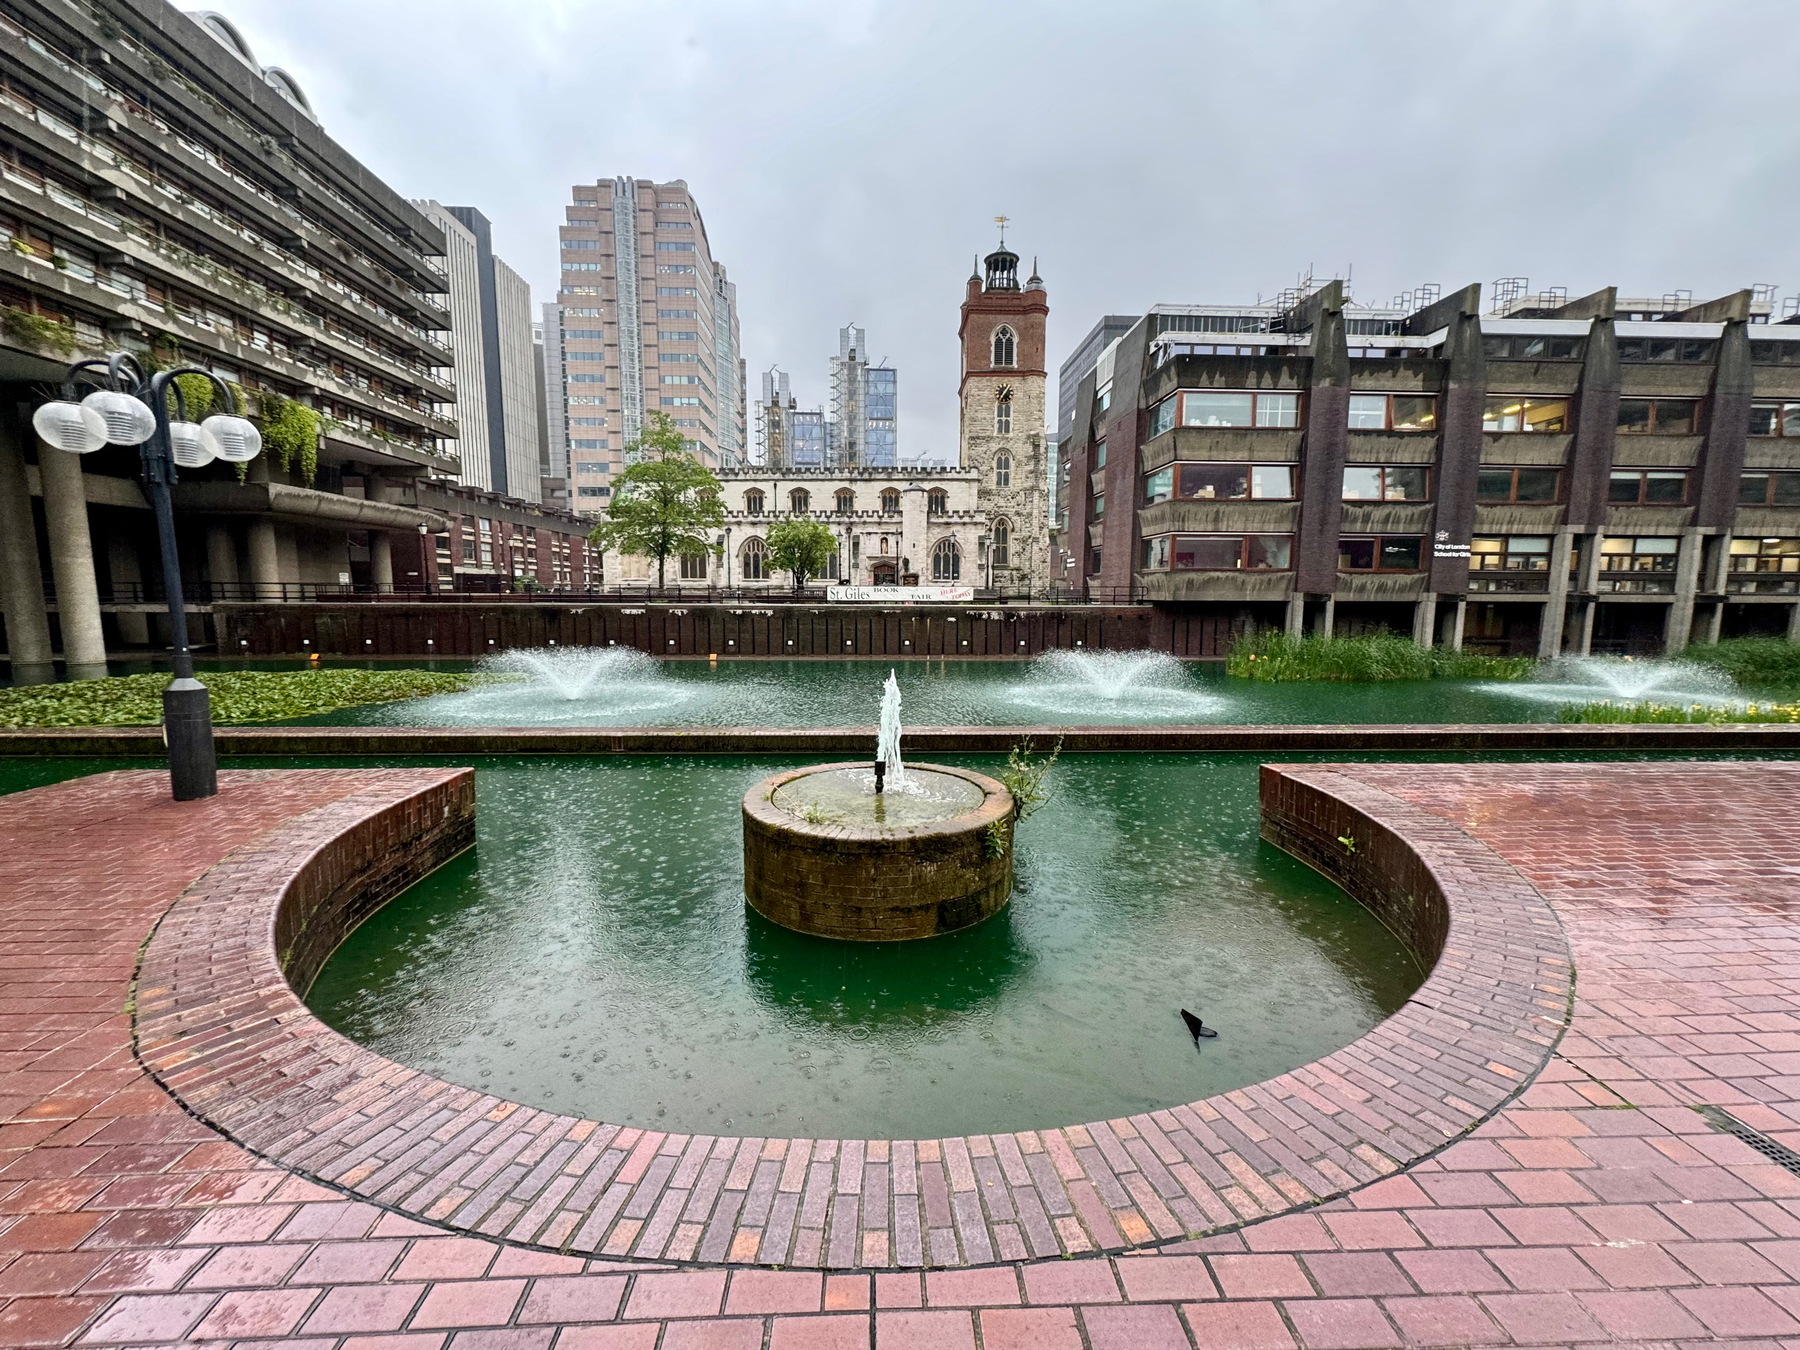 A fountain in a pond, surrounded by brick pavement with brutalist architecture and modern buildings in the background, under a rainy sky.